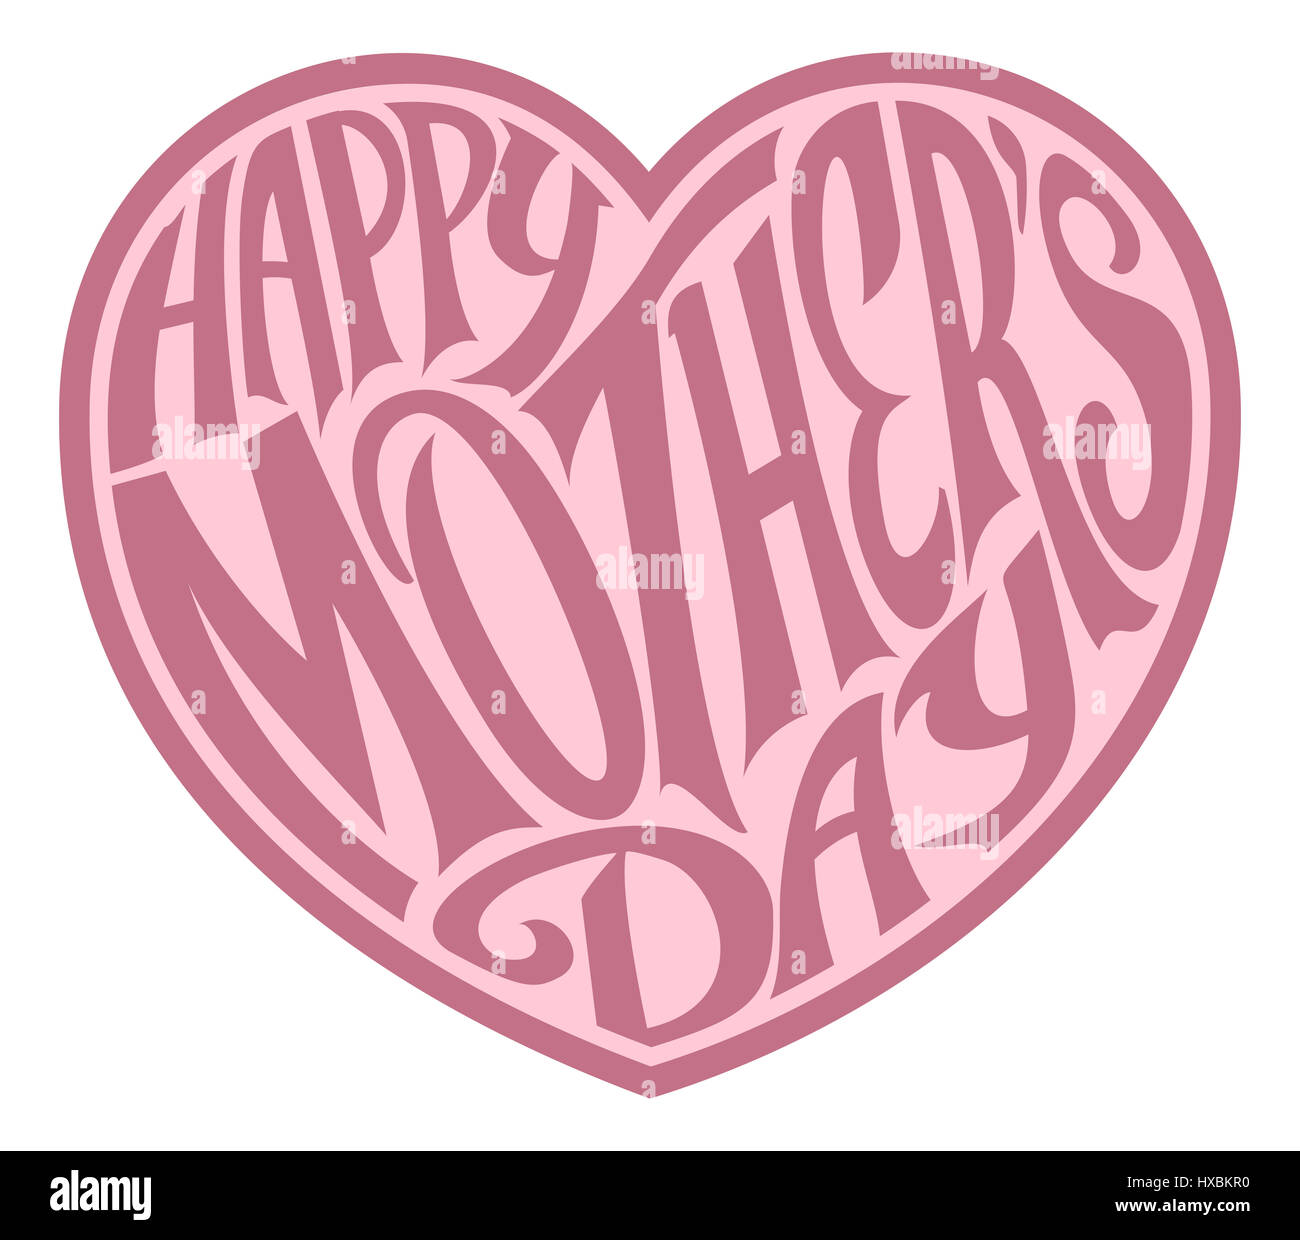 A heart design with Happy Mothers Day text Stock Photo